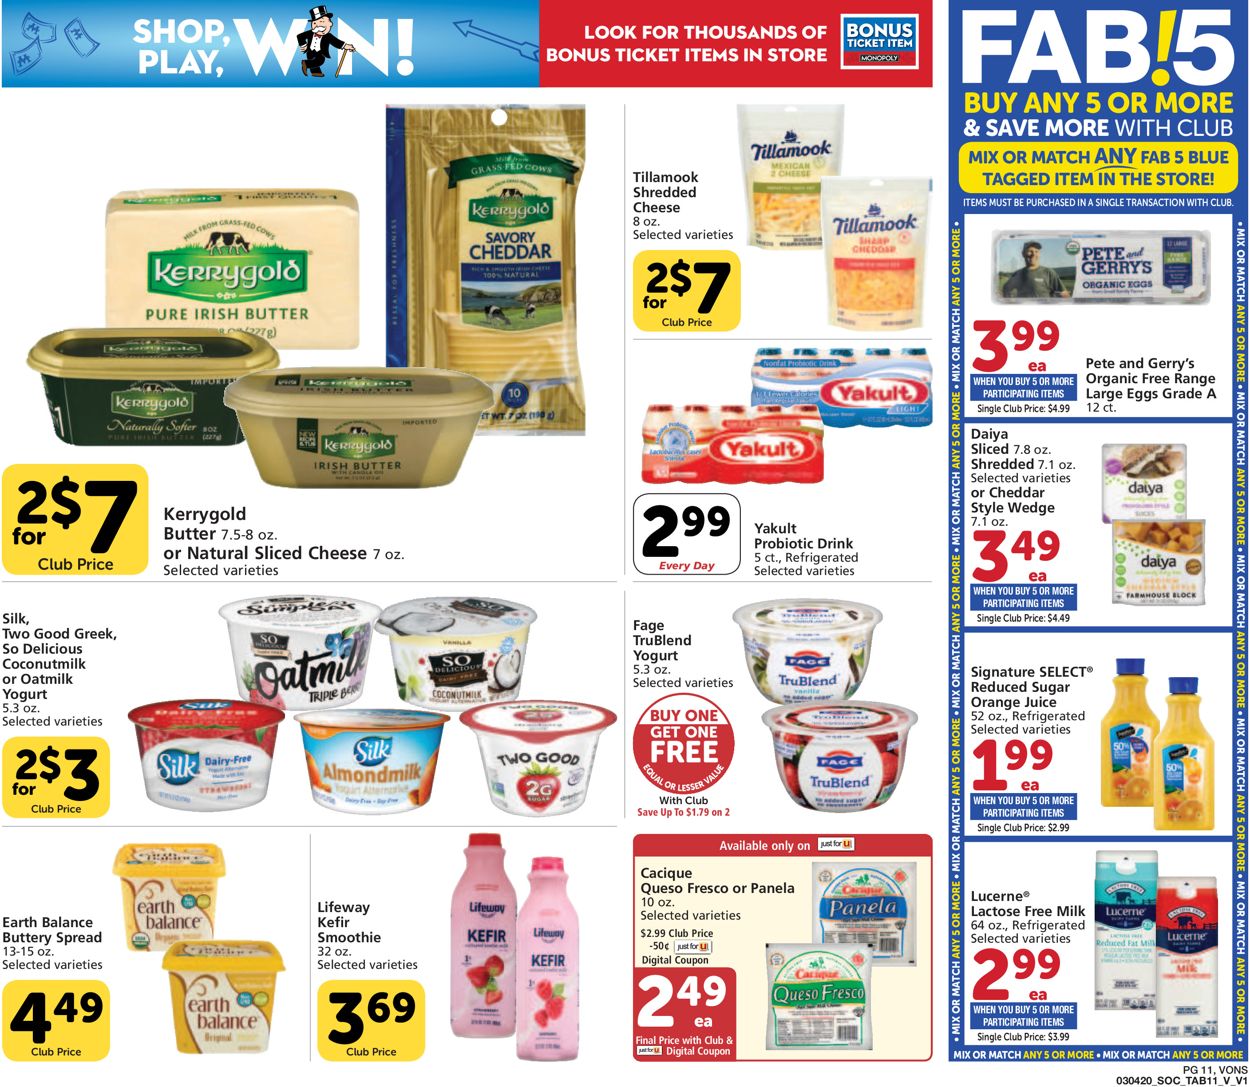 Vons Ad from 03/04/2020